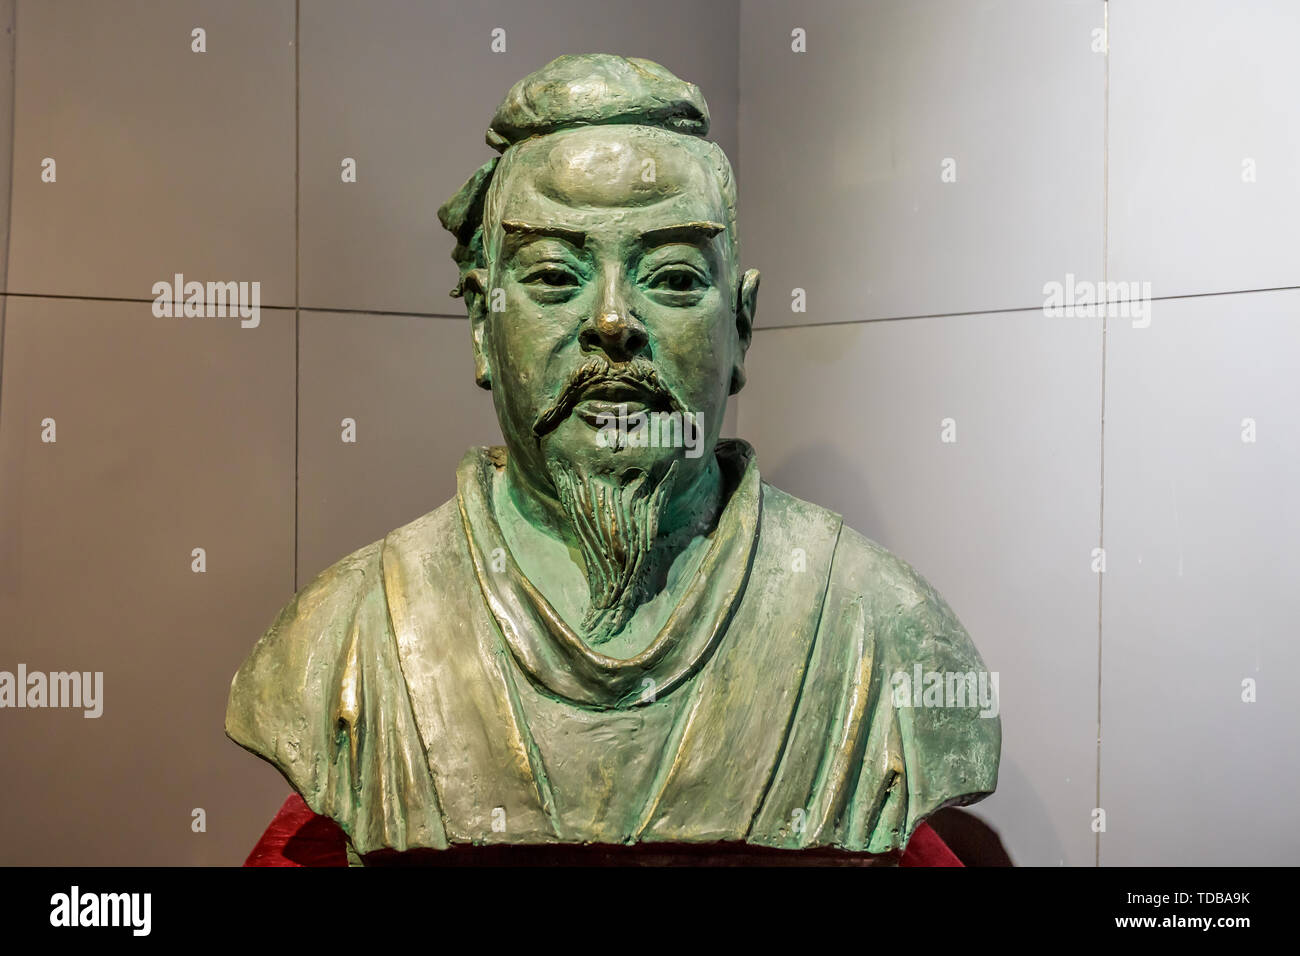 Statue of ancient celebrity Zheng Xuan Stock Photo - Alamy